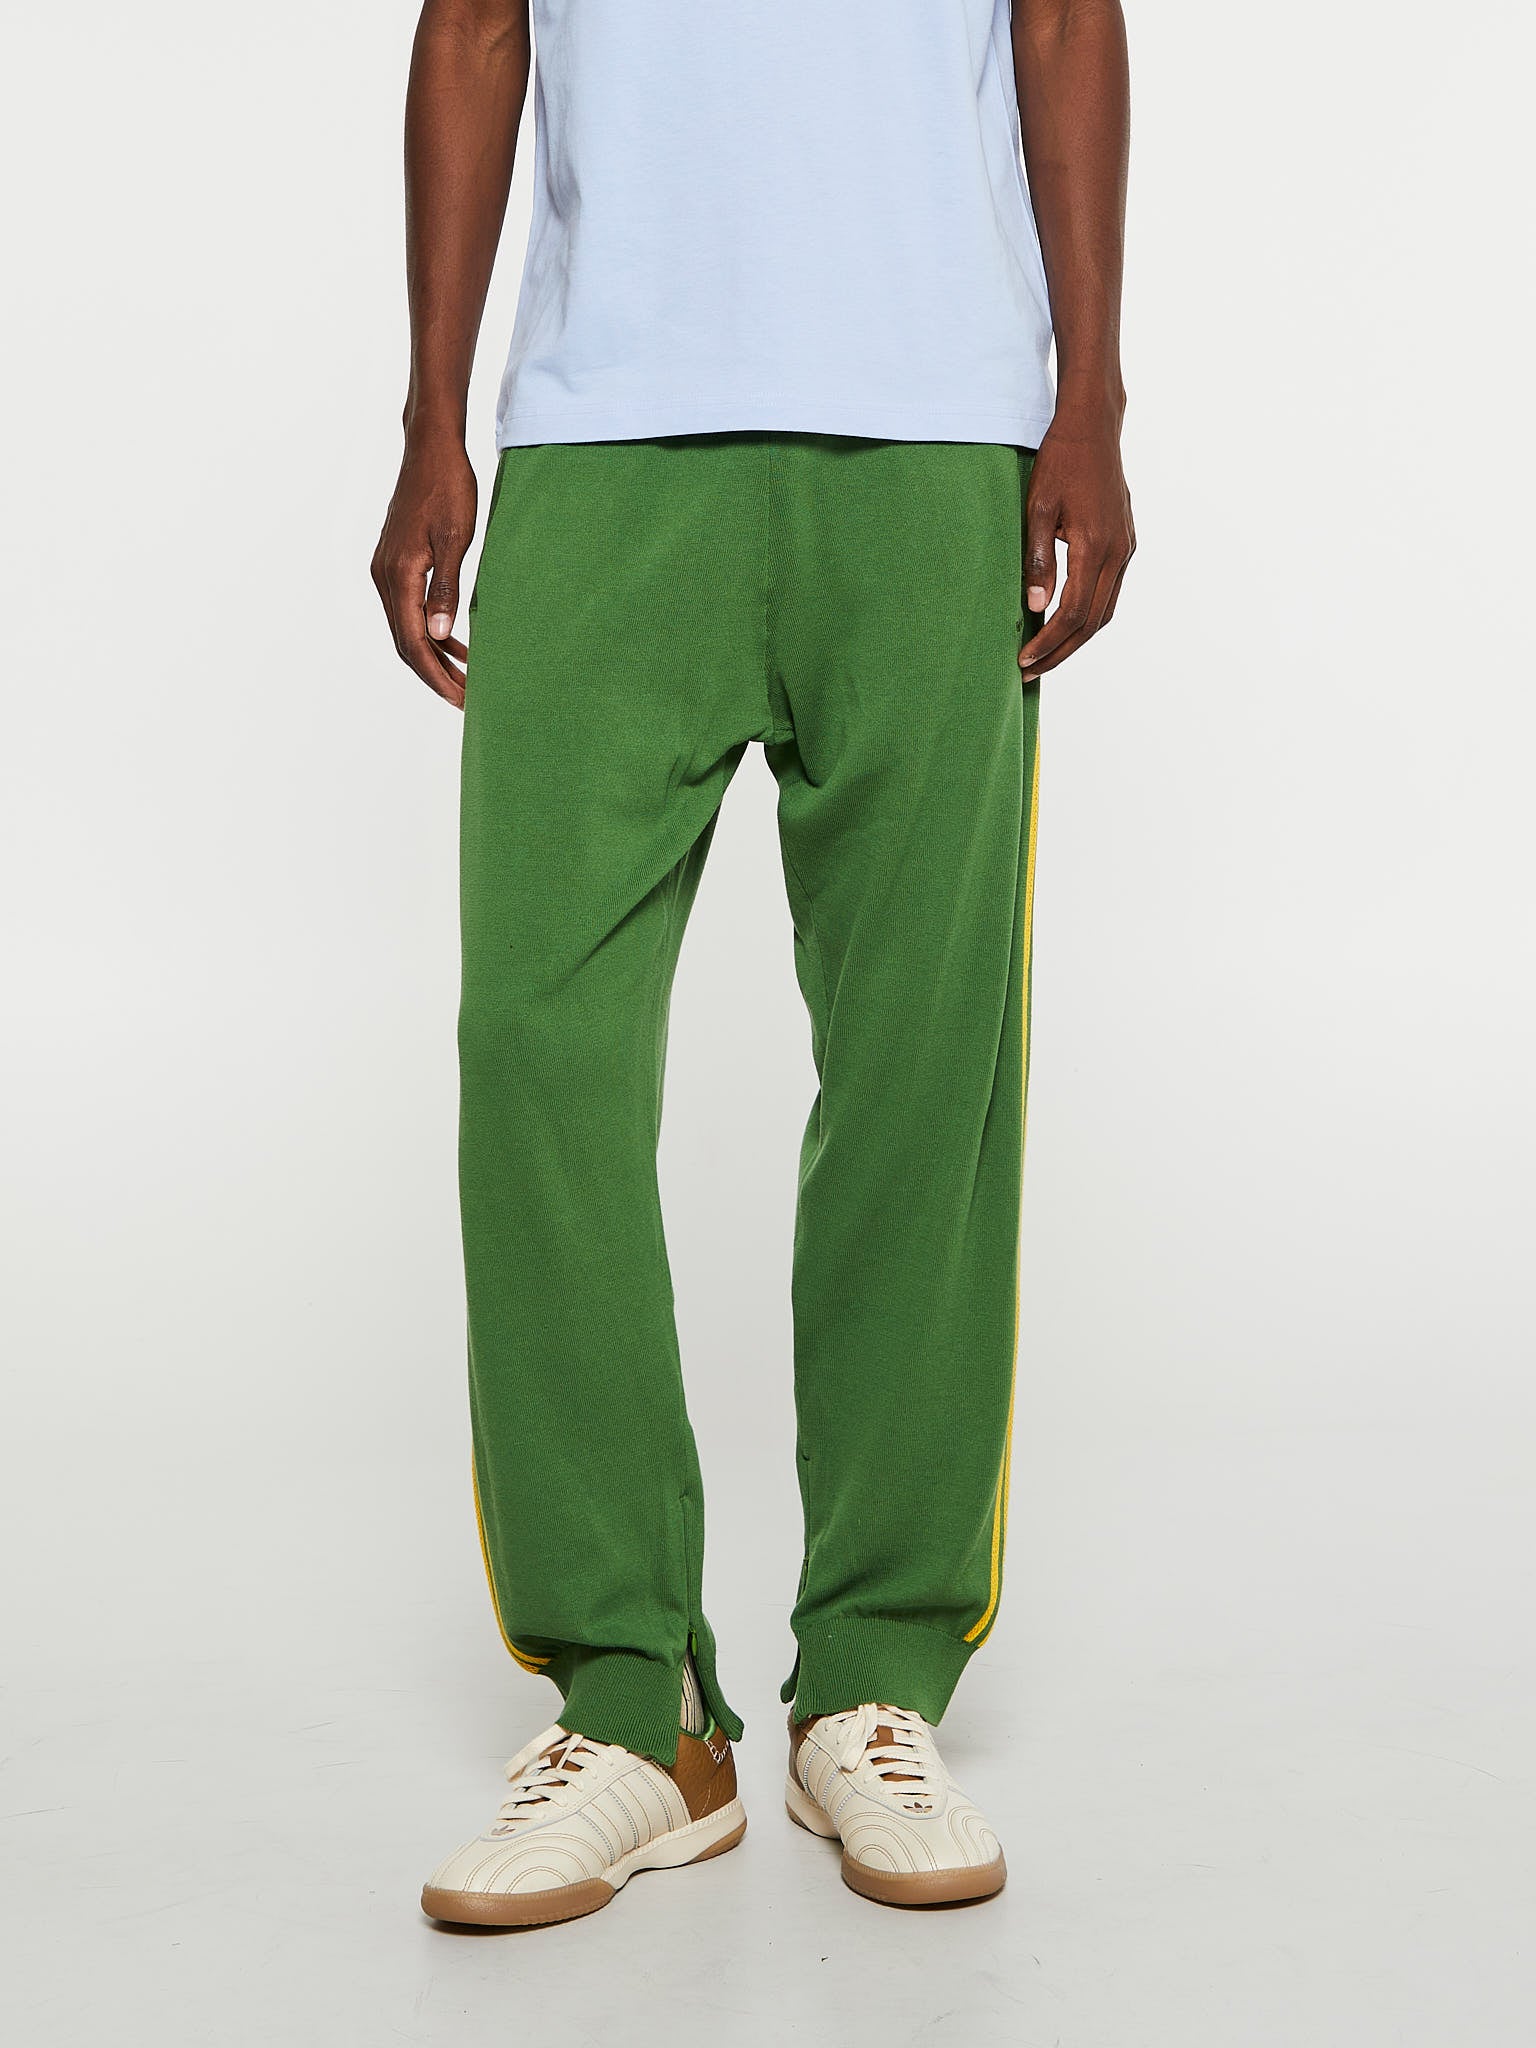 Wales Bonner New Knit Track Pants in Crew Green